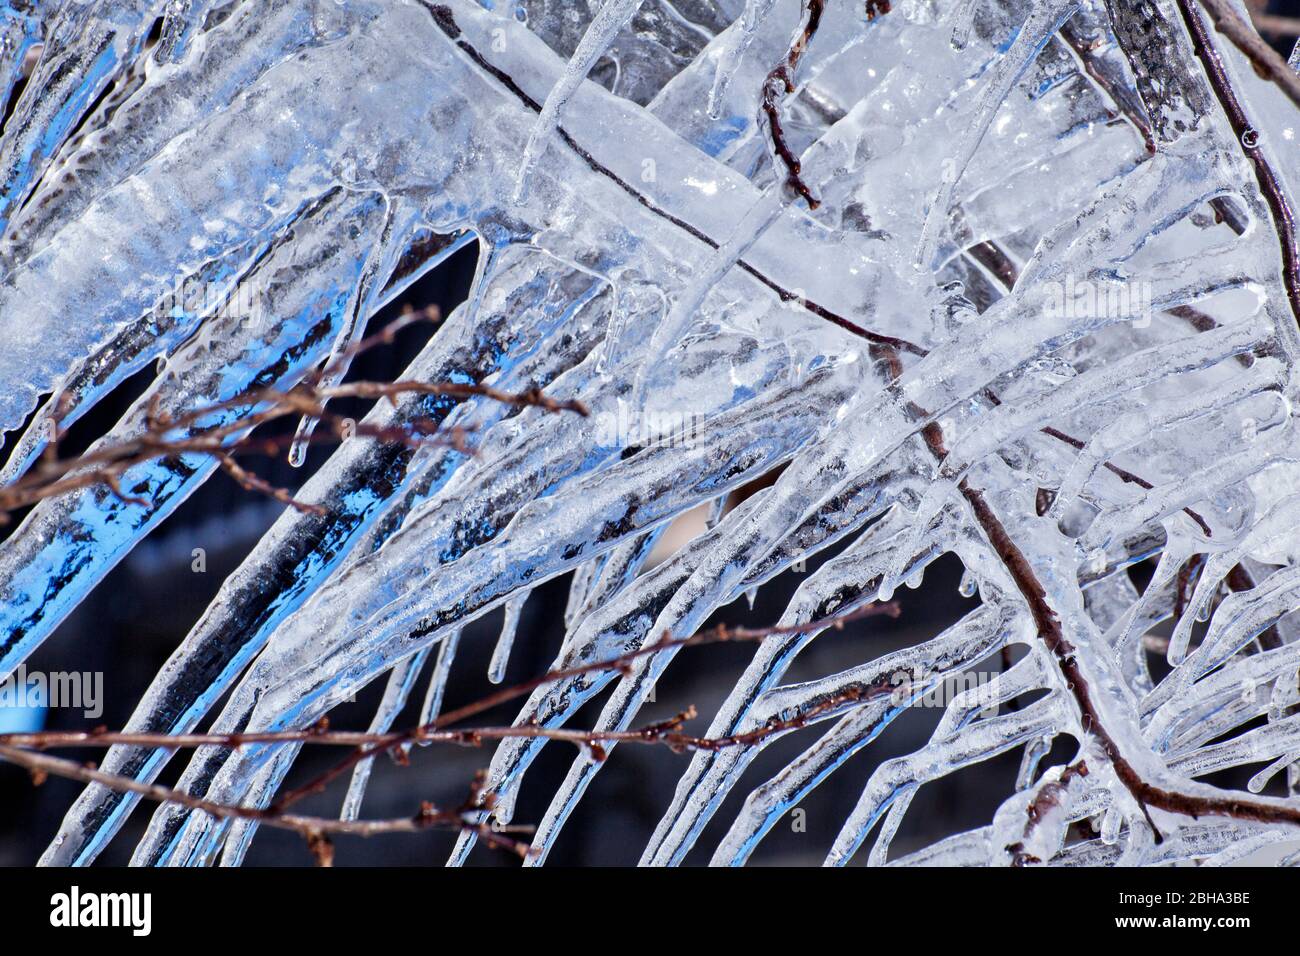 filigree icicles on thin branches Stock Photo